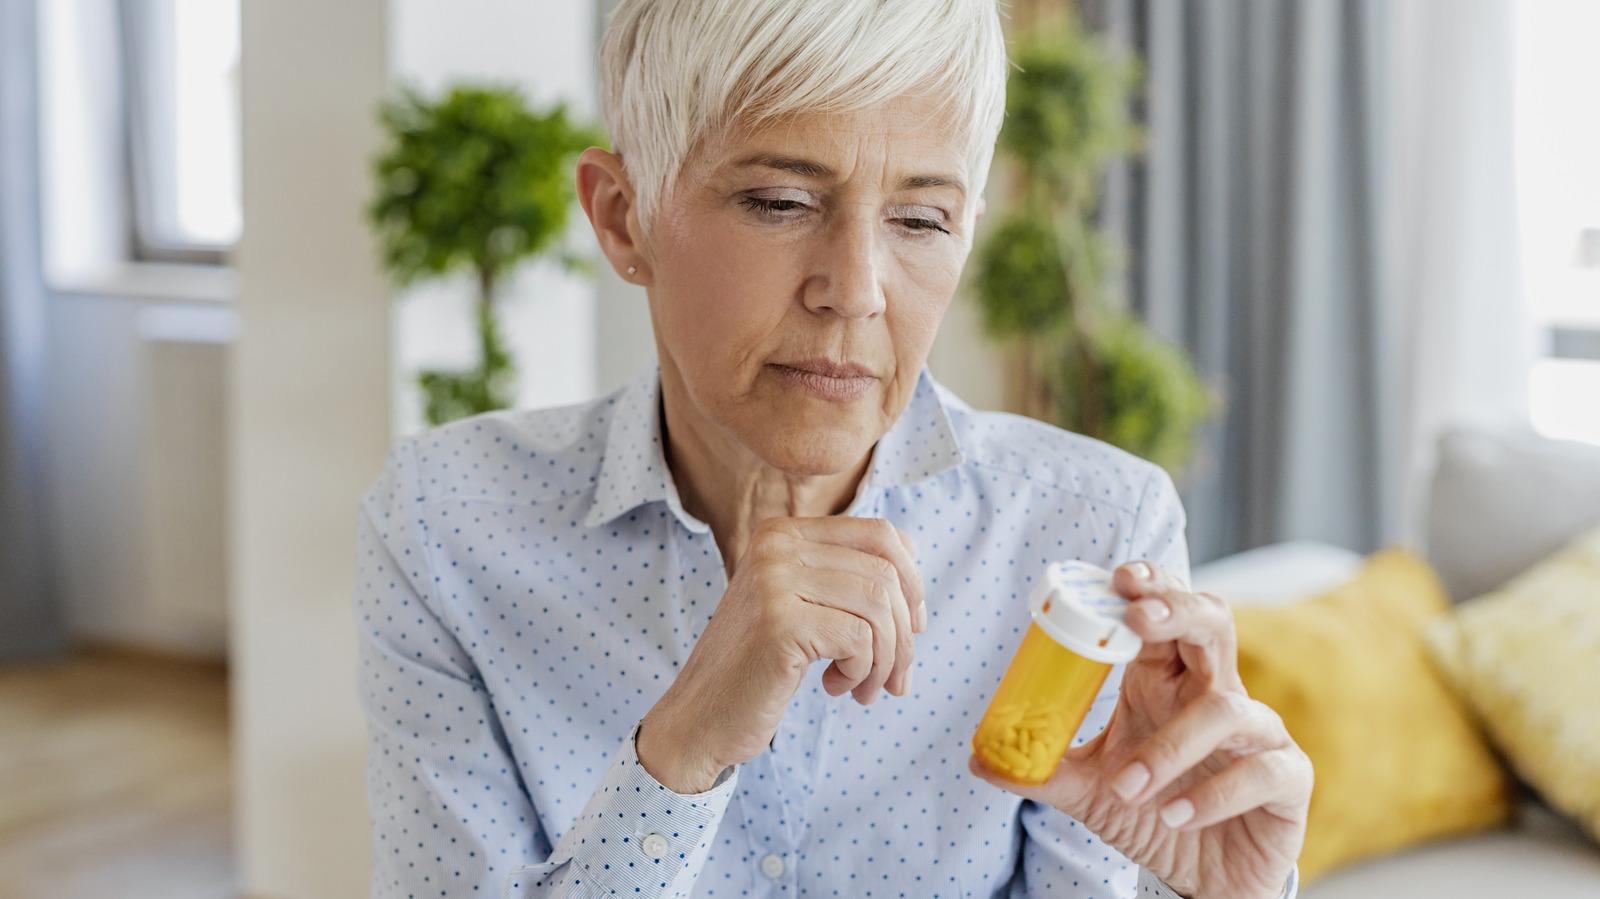 This Popular OTC Pain Medication Gets Riskier To Take As You Age